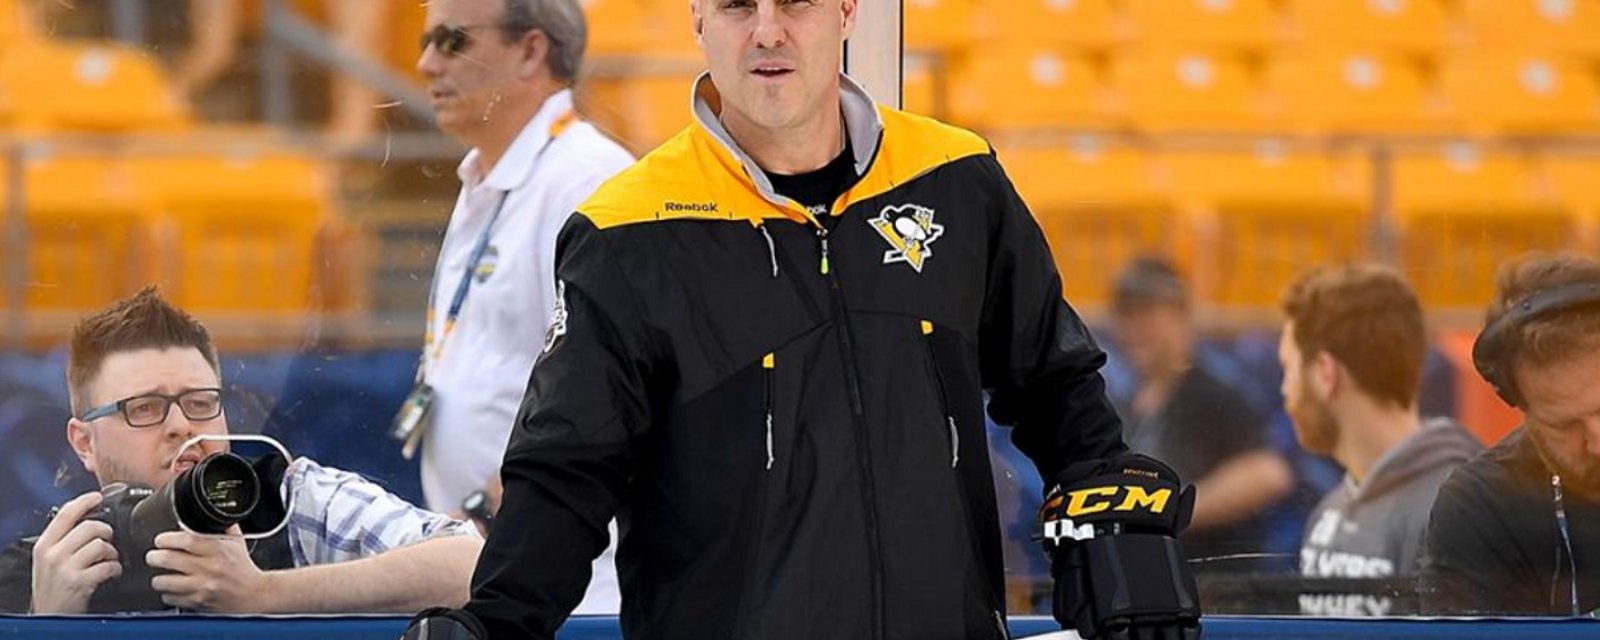 Former NHLer 'confirmed' as part of Rick Tocchet's new coaching staff in Vancouver.